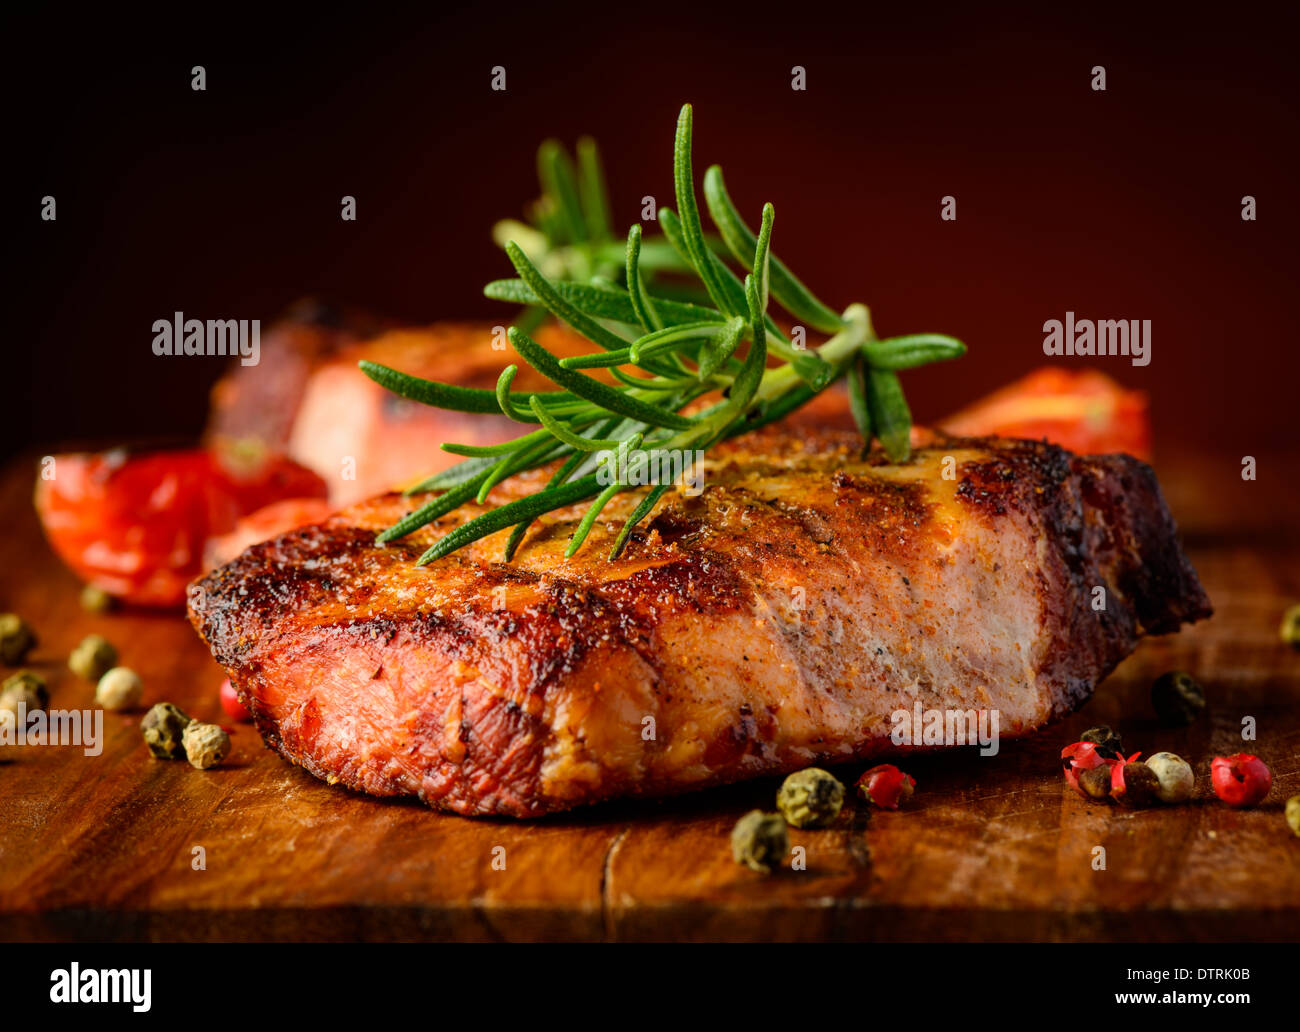 still life with grilled steak closeup detail and spices Stock Photo